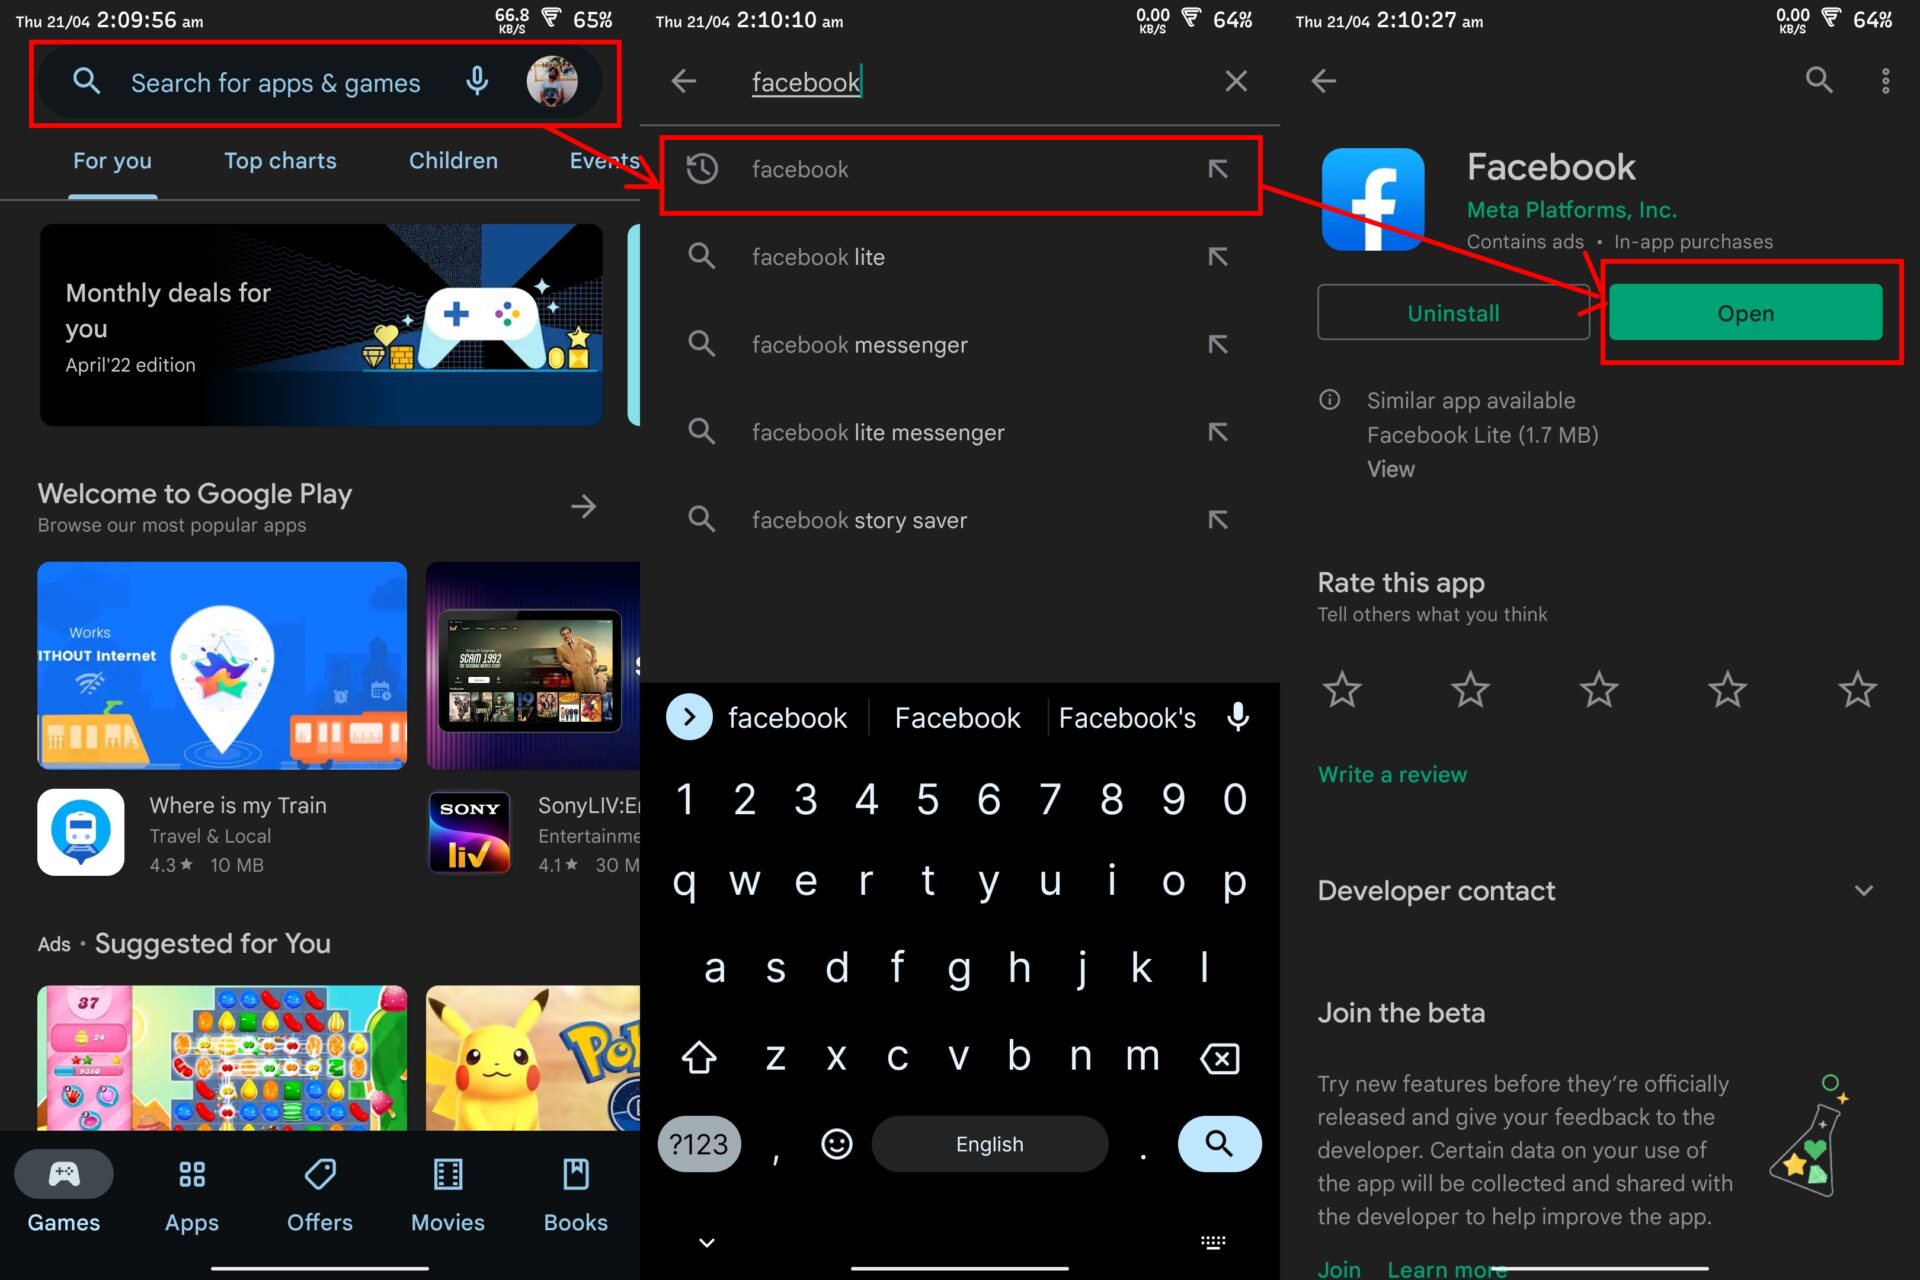 Update the Facebook App to the latest version from the Play Store